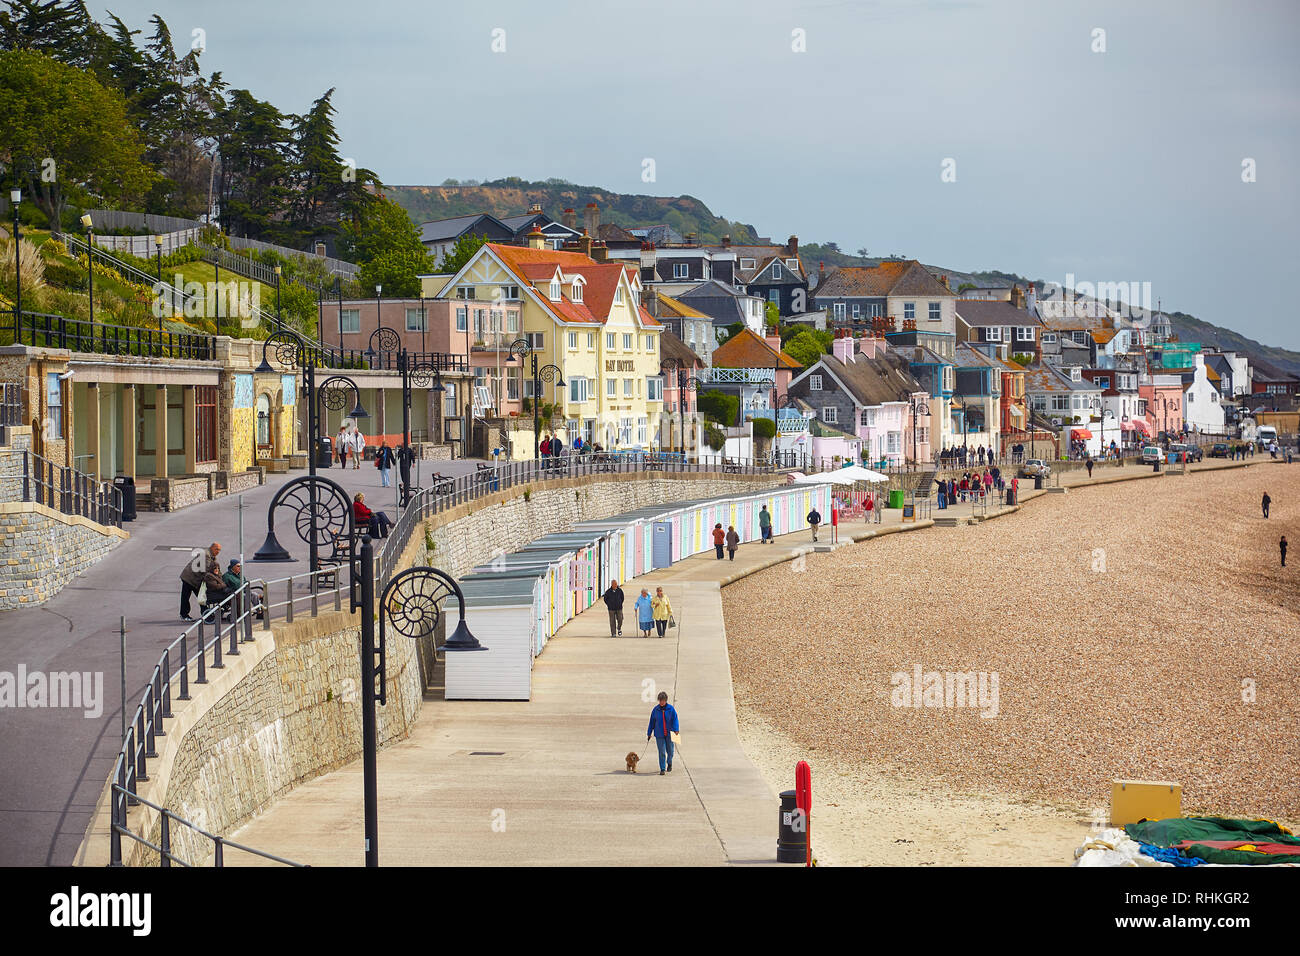 LYME REGIS, ENGLAND - MAY 12, 2009: The view of the Lyme Regis Marine Parade – a promenade along the Lyme bay, a part of South West Coast Path. West D Stock Photo